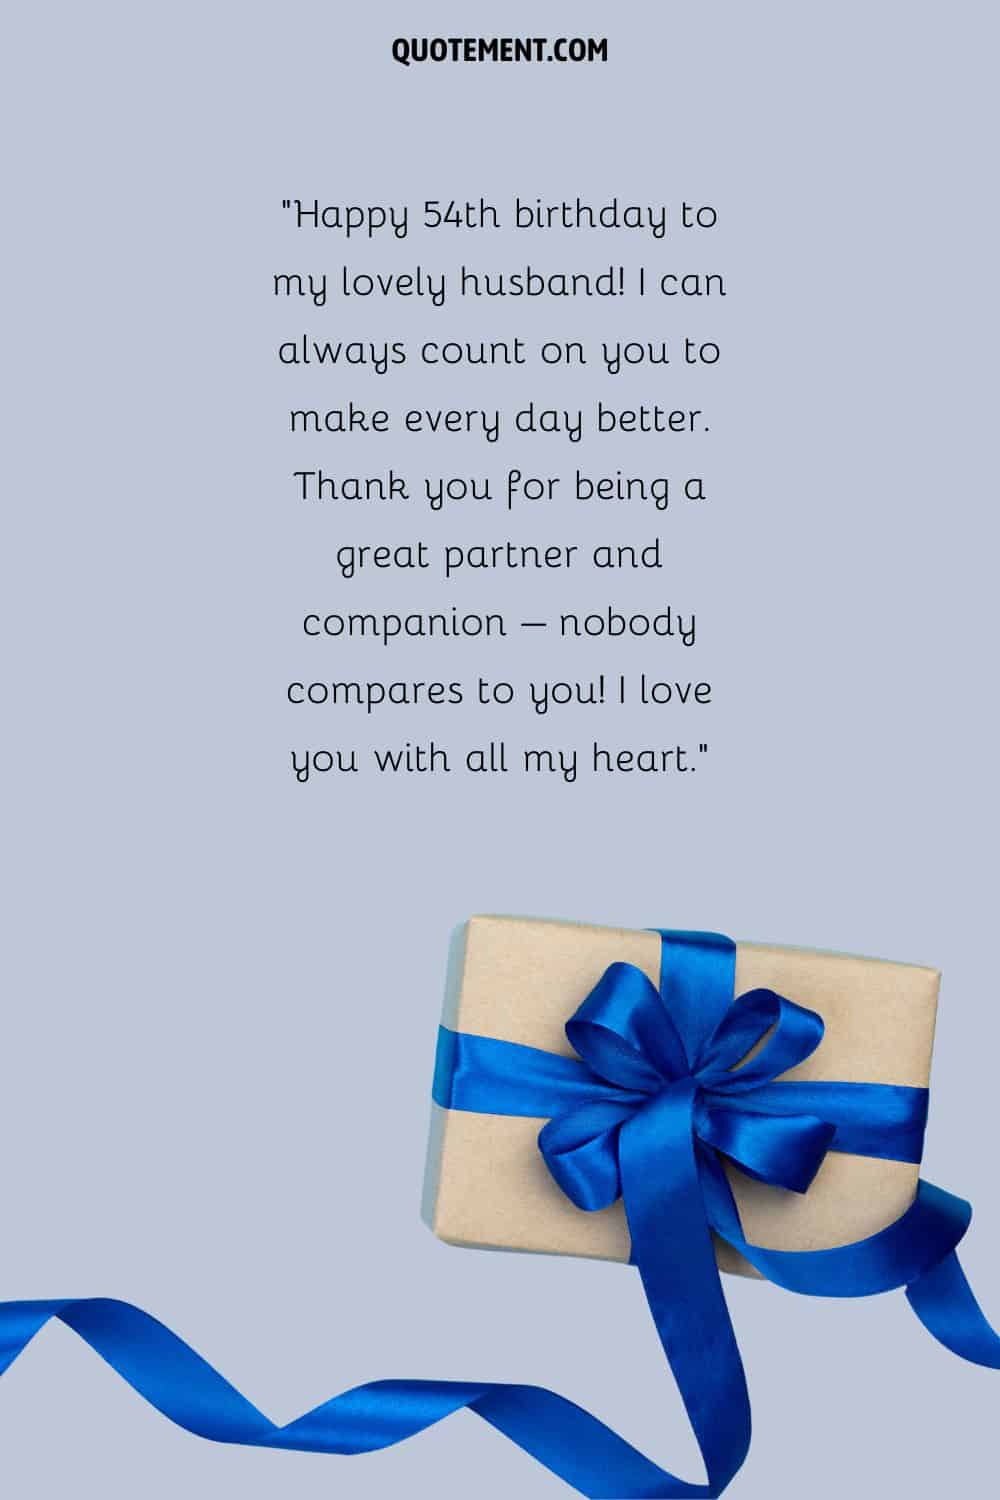 Lovely message for a husband's 54th birthday and a gift with a blue ribbon under it
